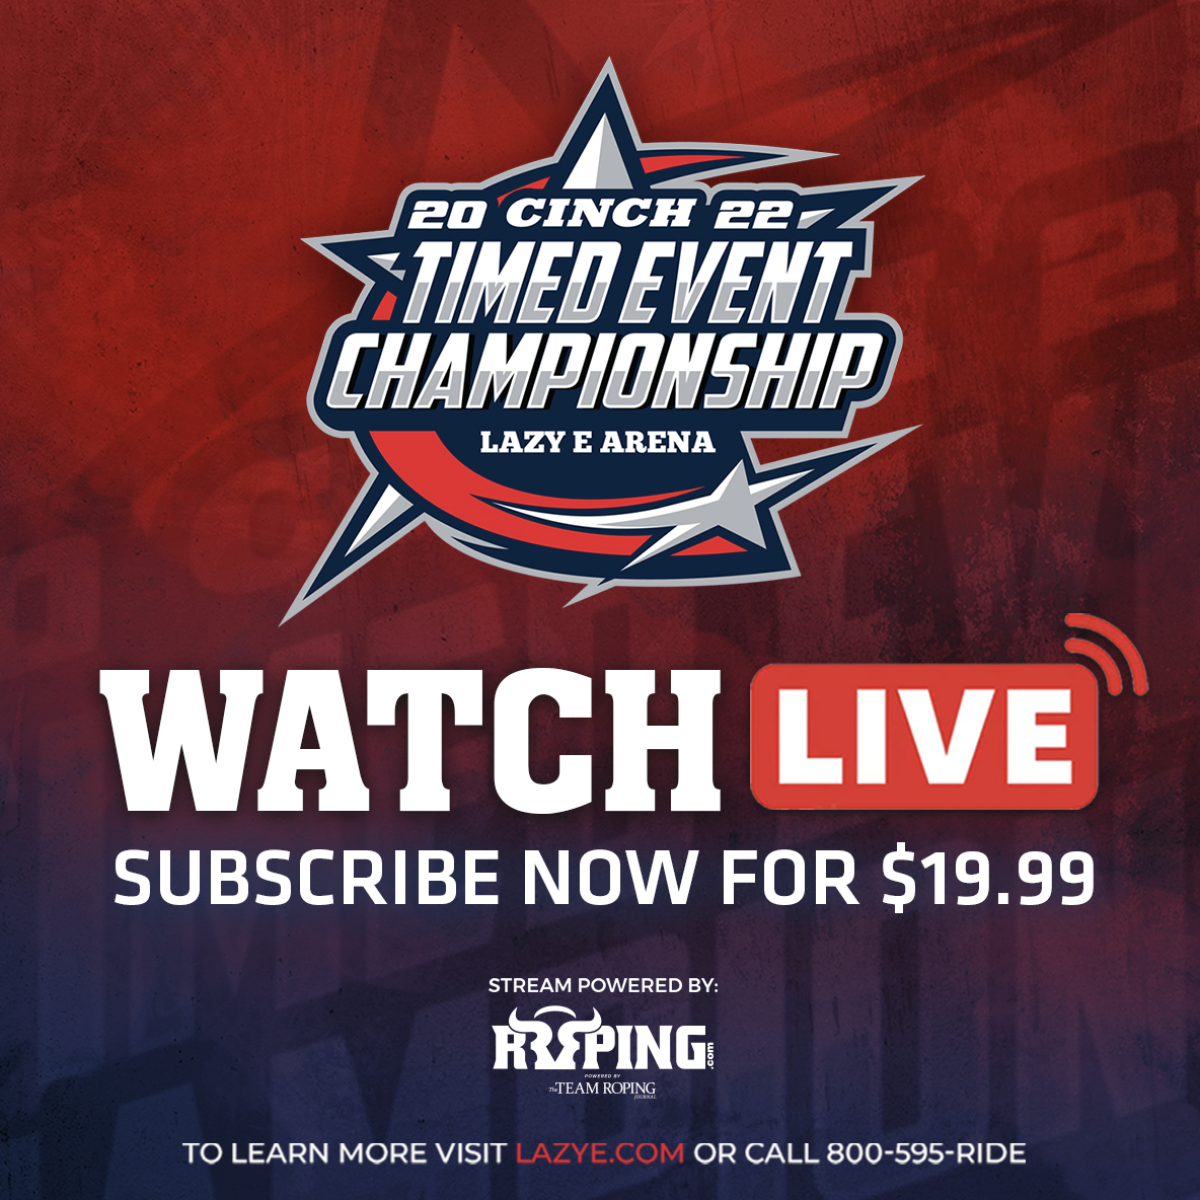 Cinch Timed Event Championship Streaming Live All Weekend at